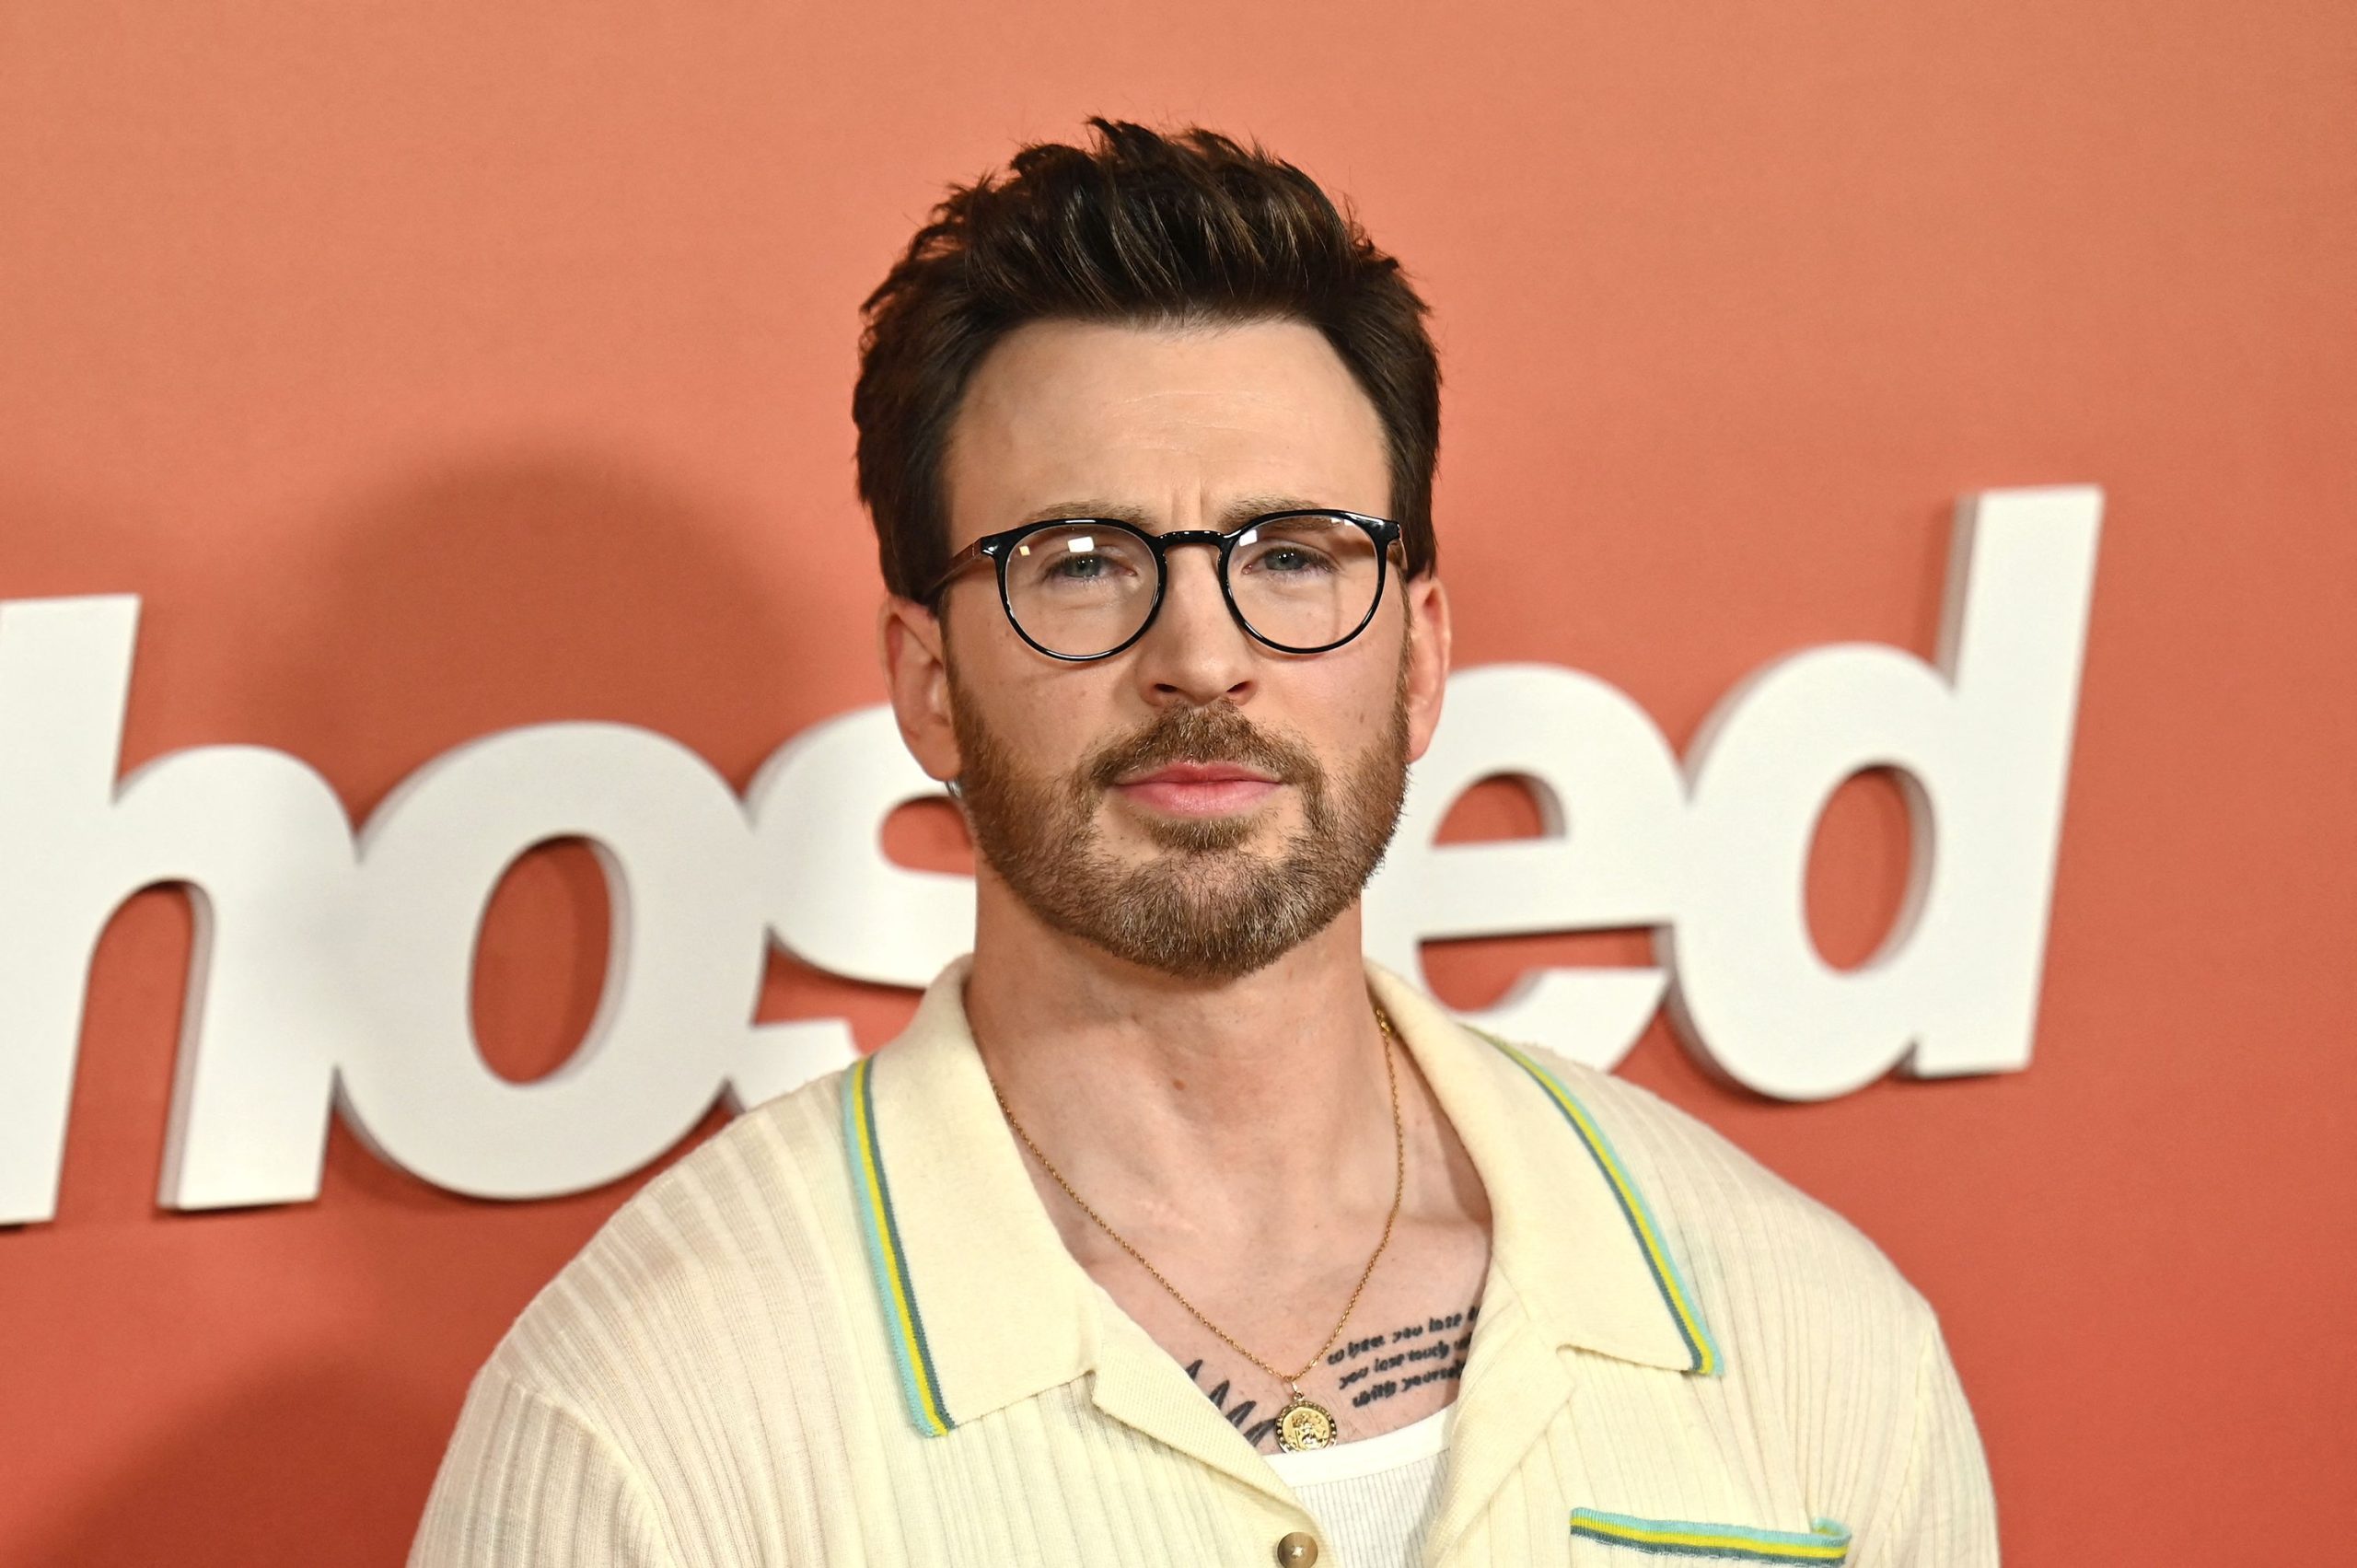 "Breaking Down the Career of Chris Evans: From Captain America to A-list Actor"